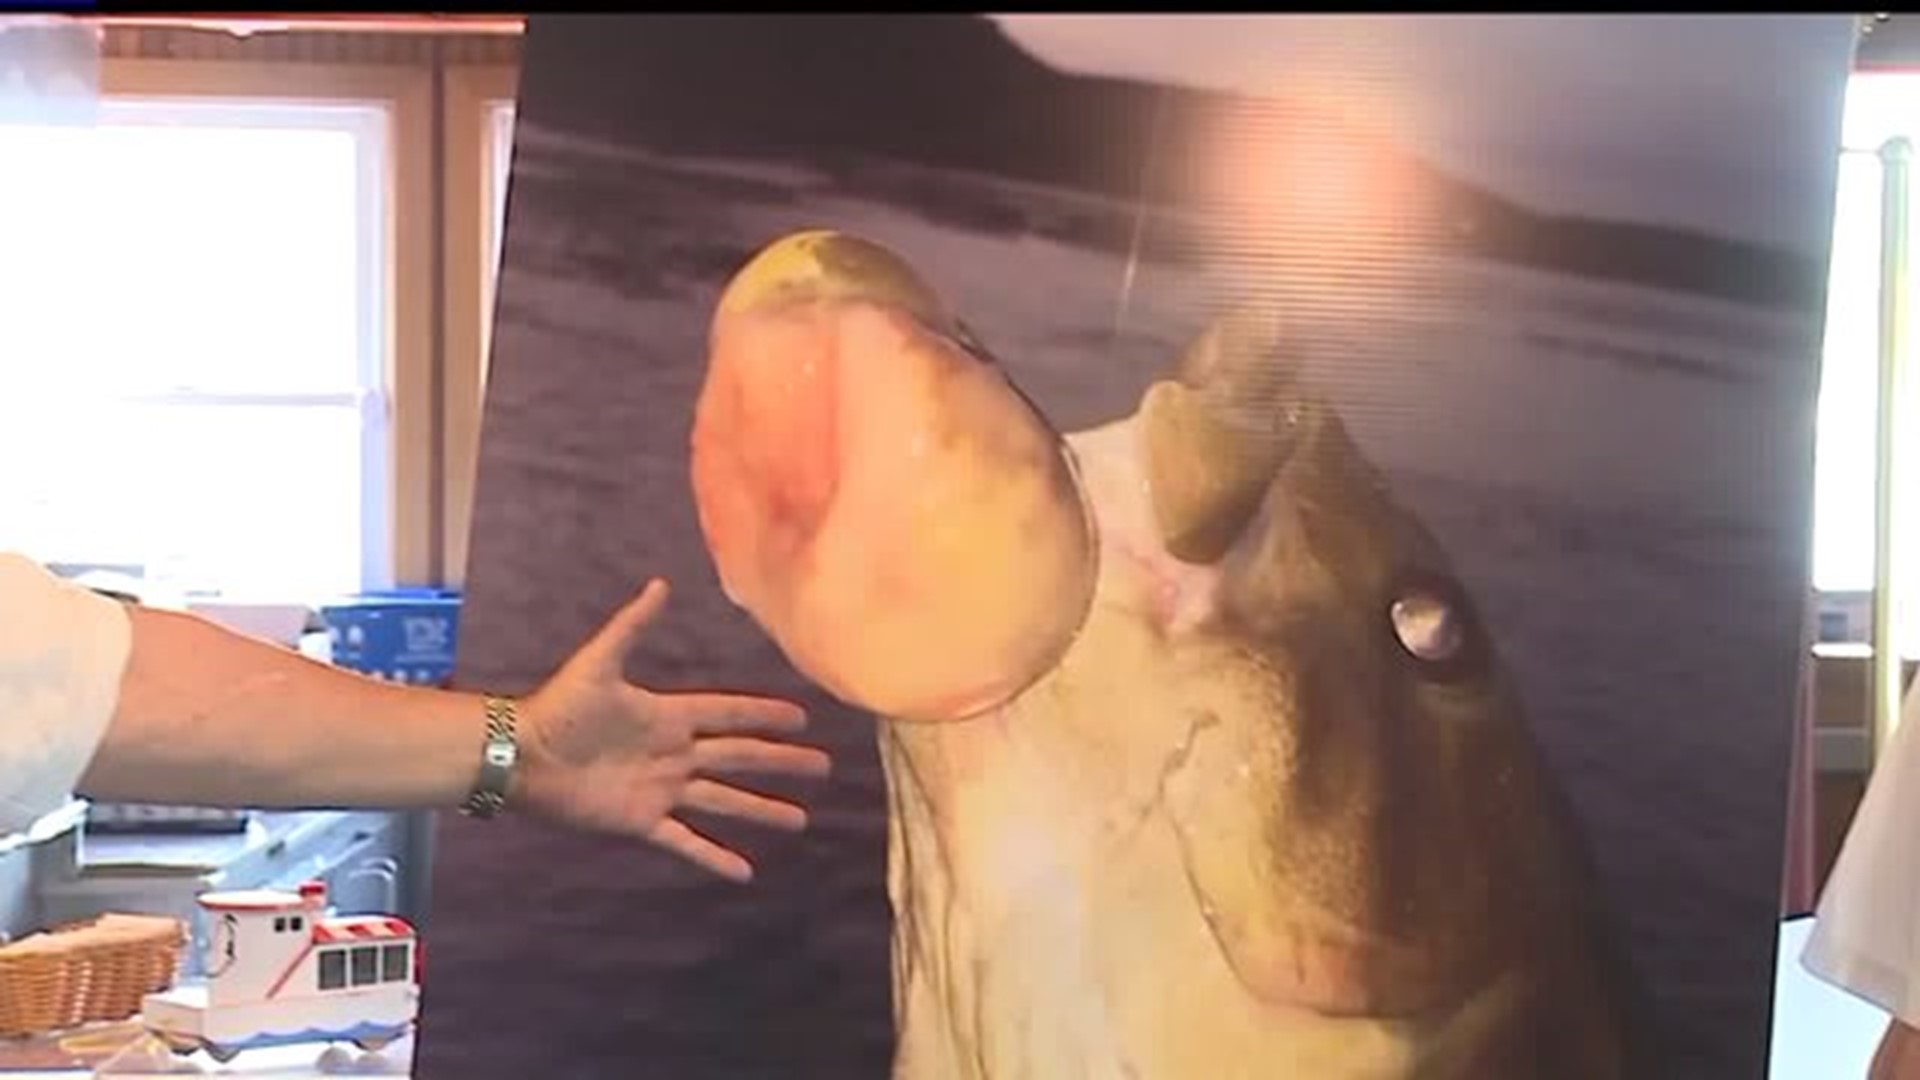 Group urges state to clean up Susquehanna River in light of fish tumor discovery